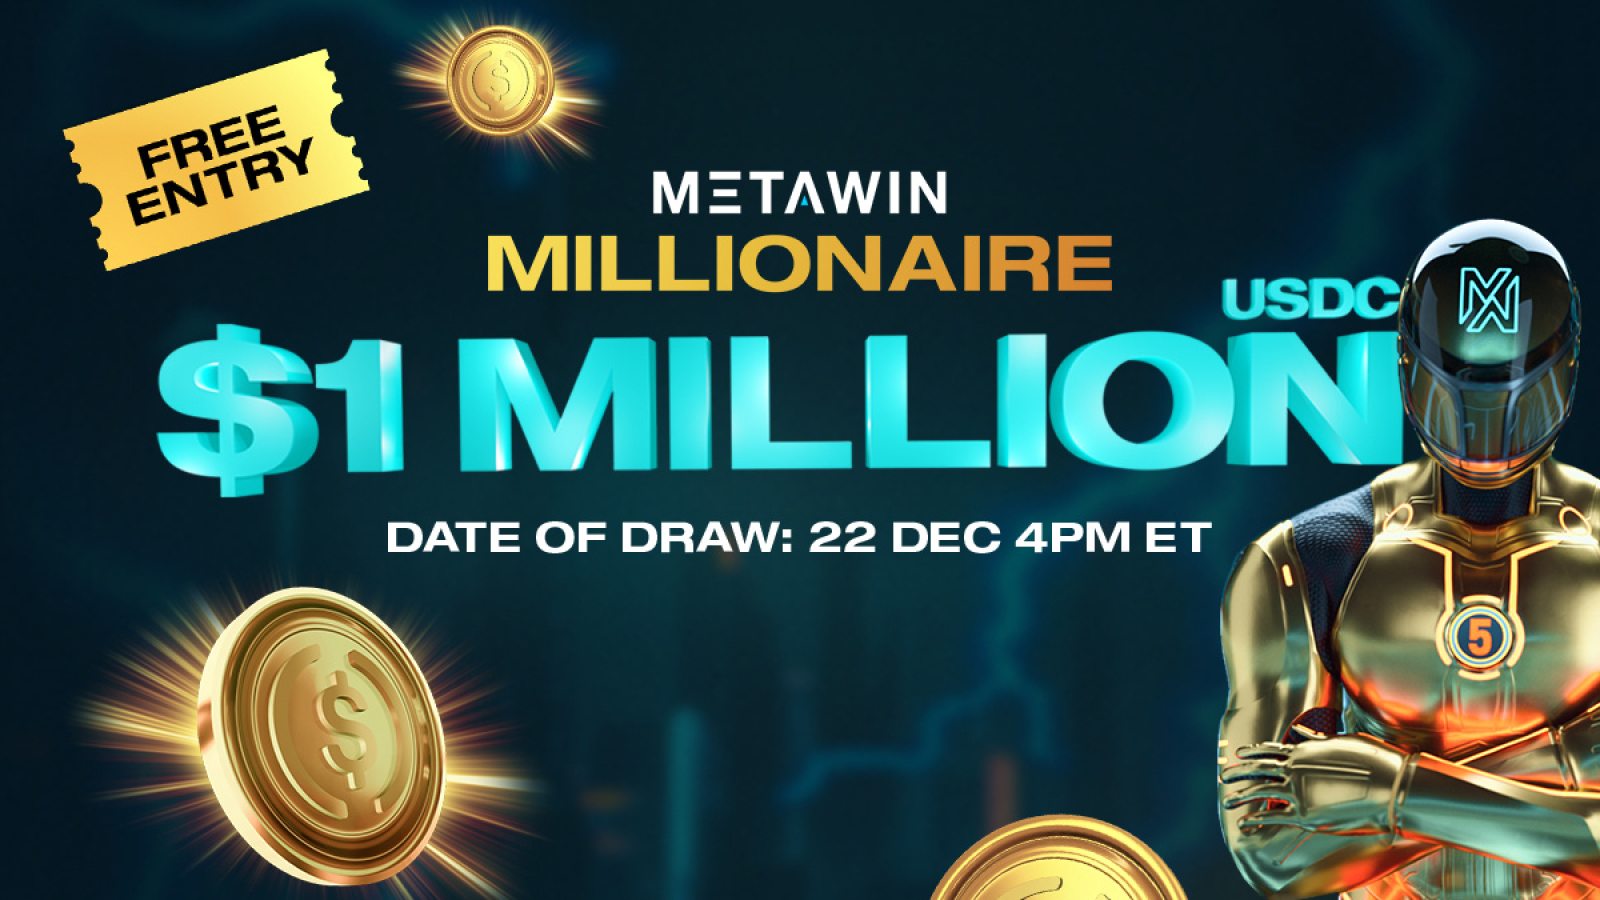 MetaWin Unveils 'MetaWin Millionaire': A Revolutionary $1 Million Cryptocurrency Giveaway